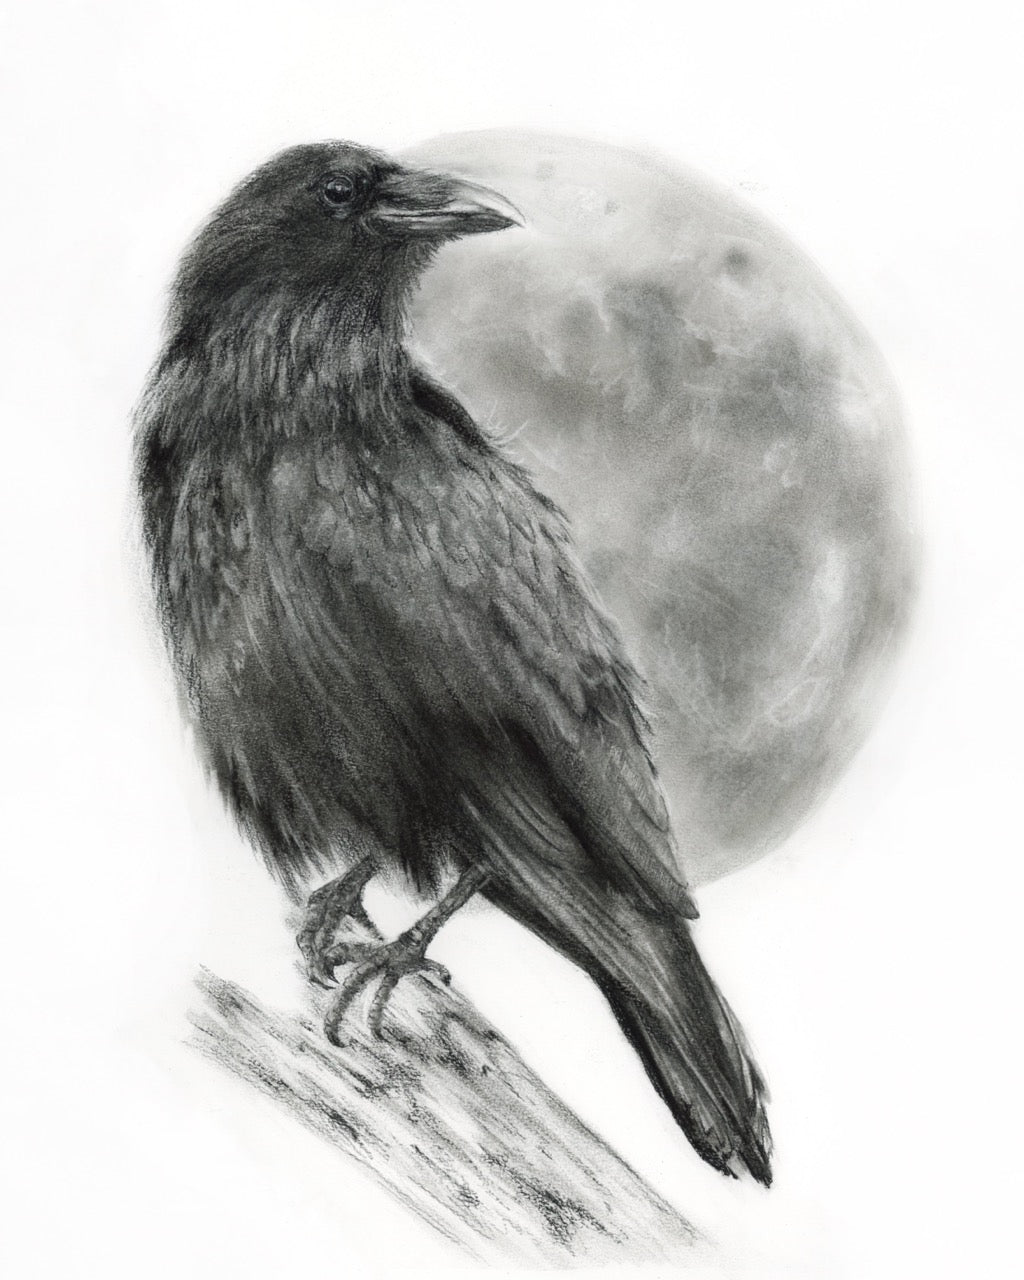 PRINT REPRODUCTION OF "RAVEN AND MOON" CHARCOAL